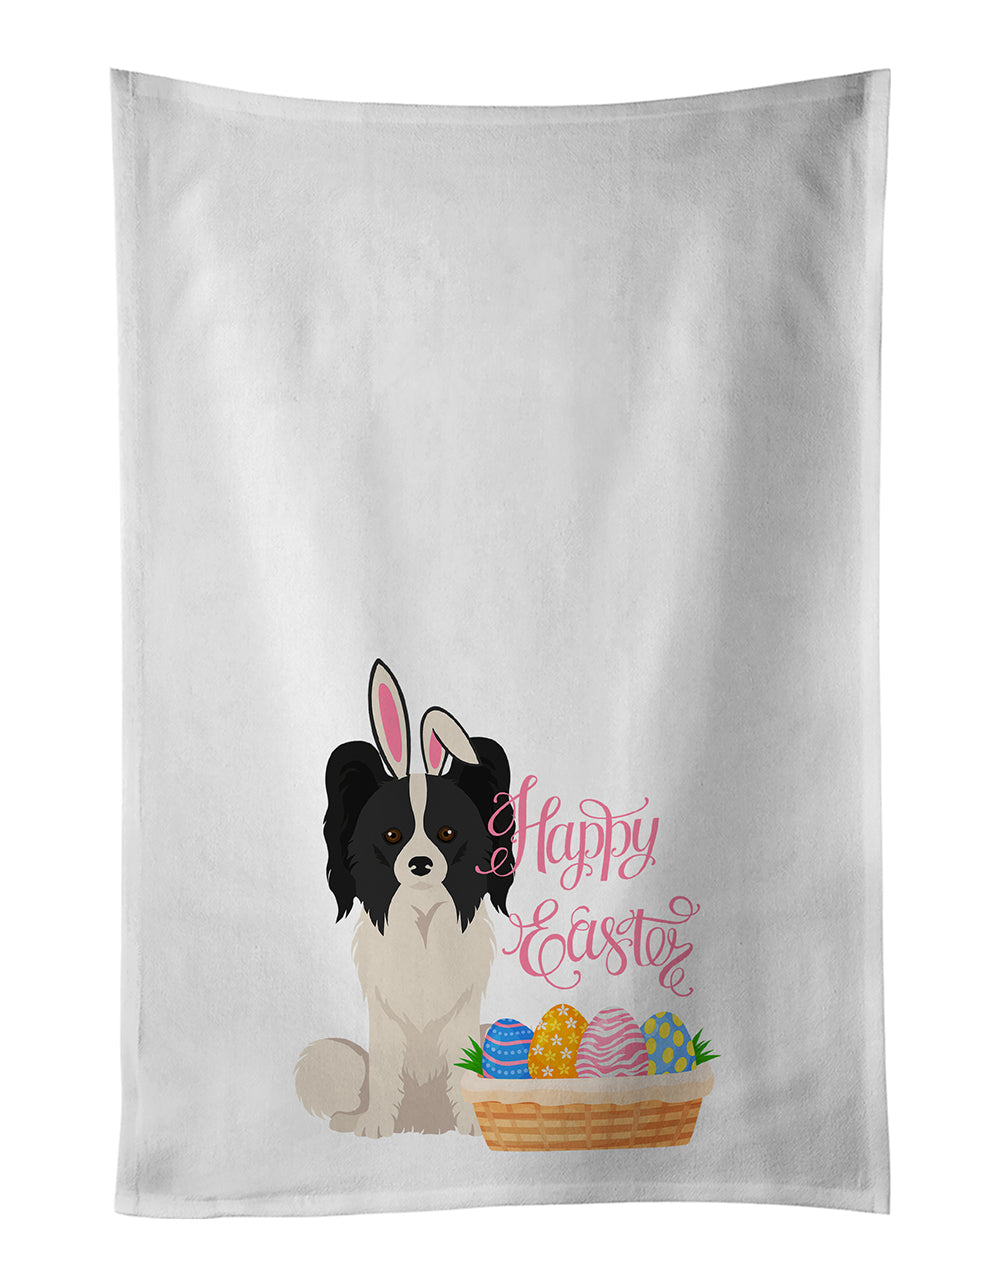 Buy this Black and White Papillon Easter White Kitchen Towel Set of 2 Dish Towels